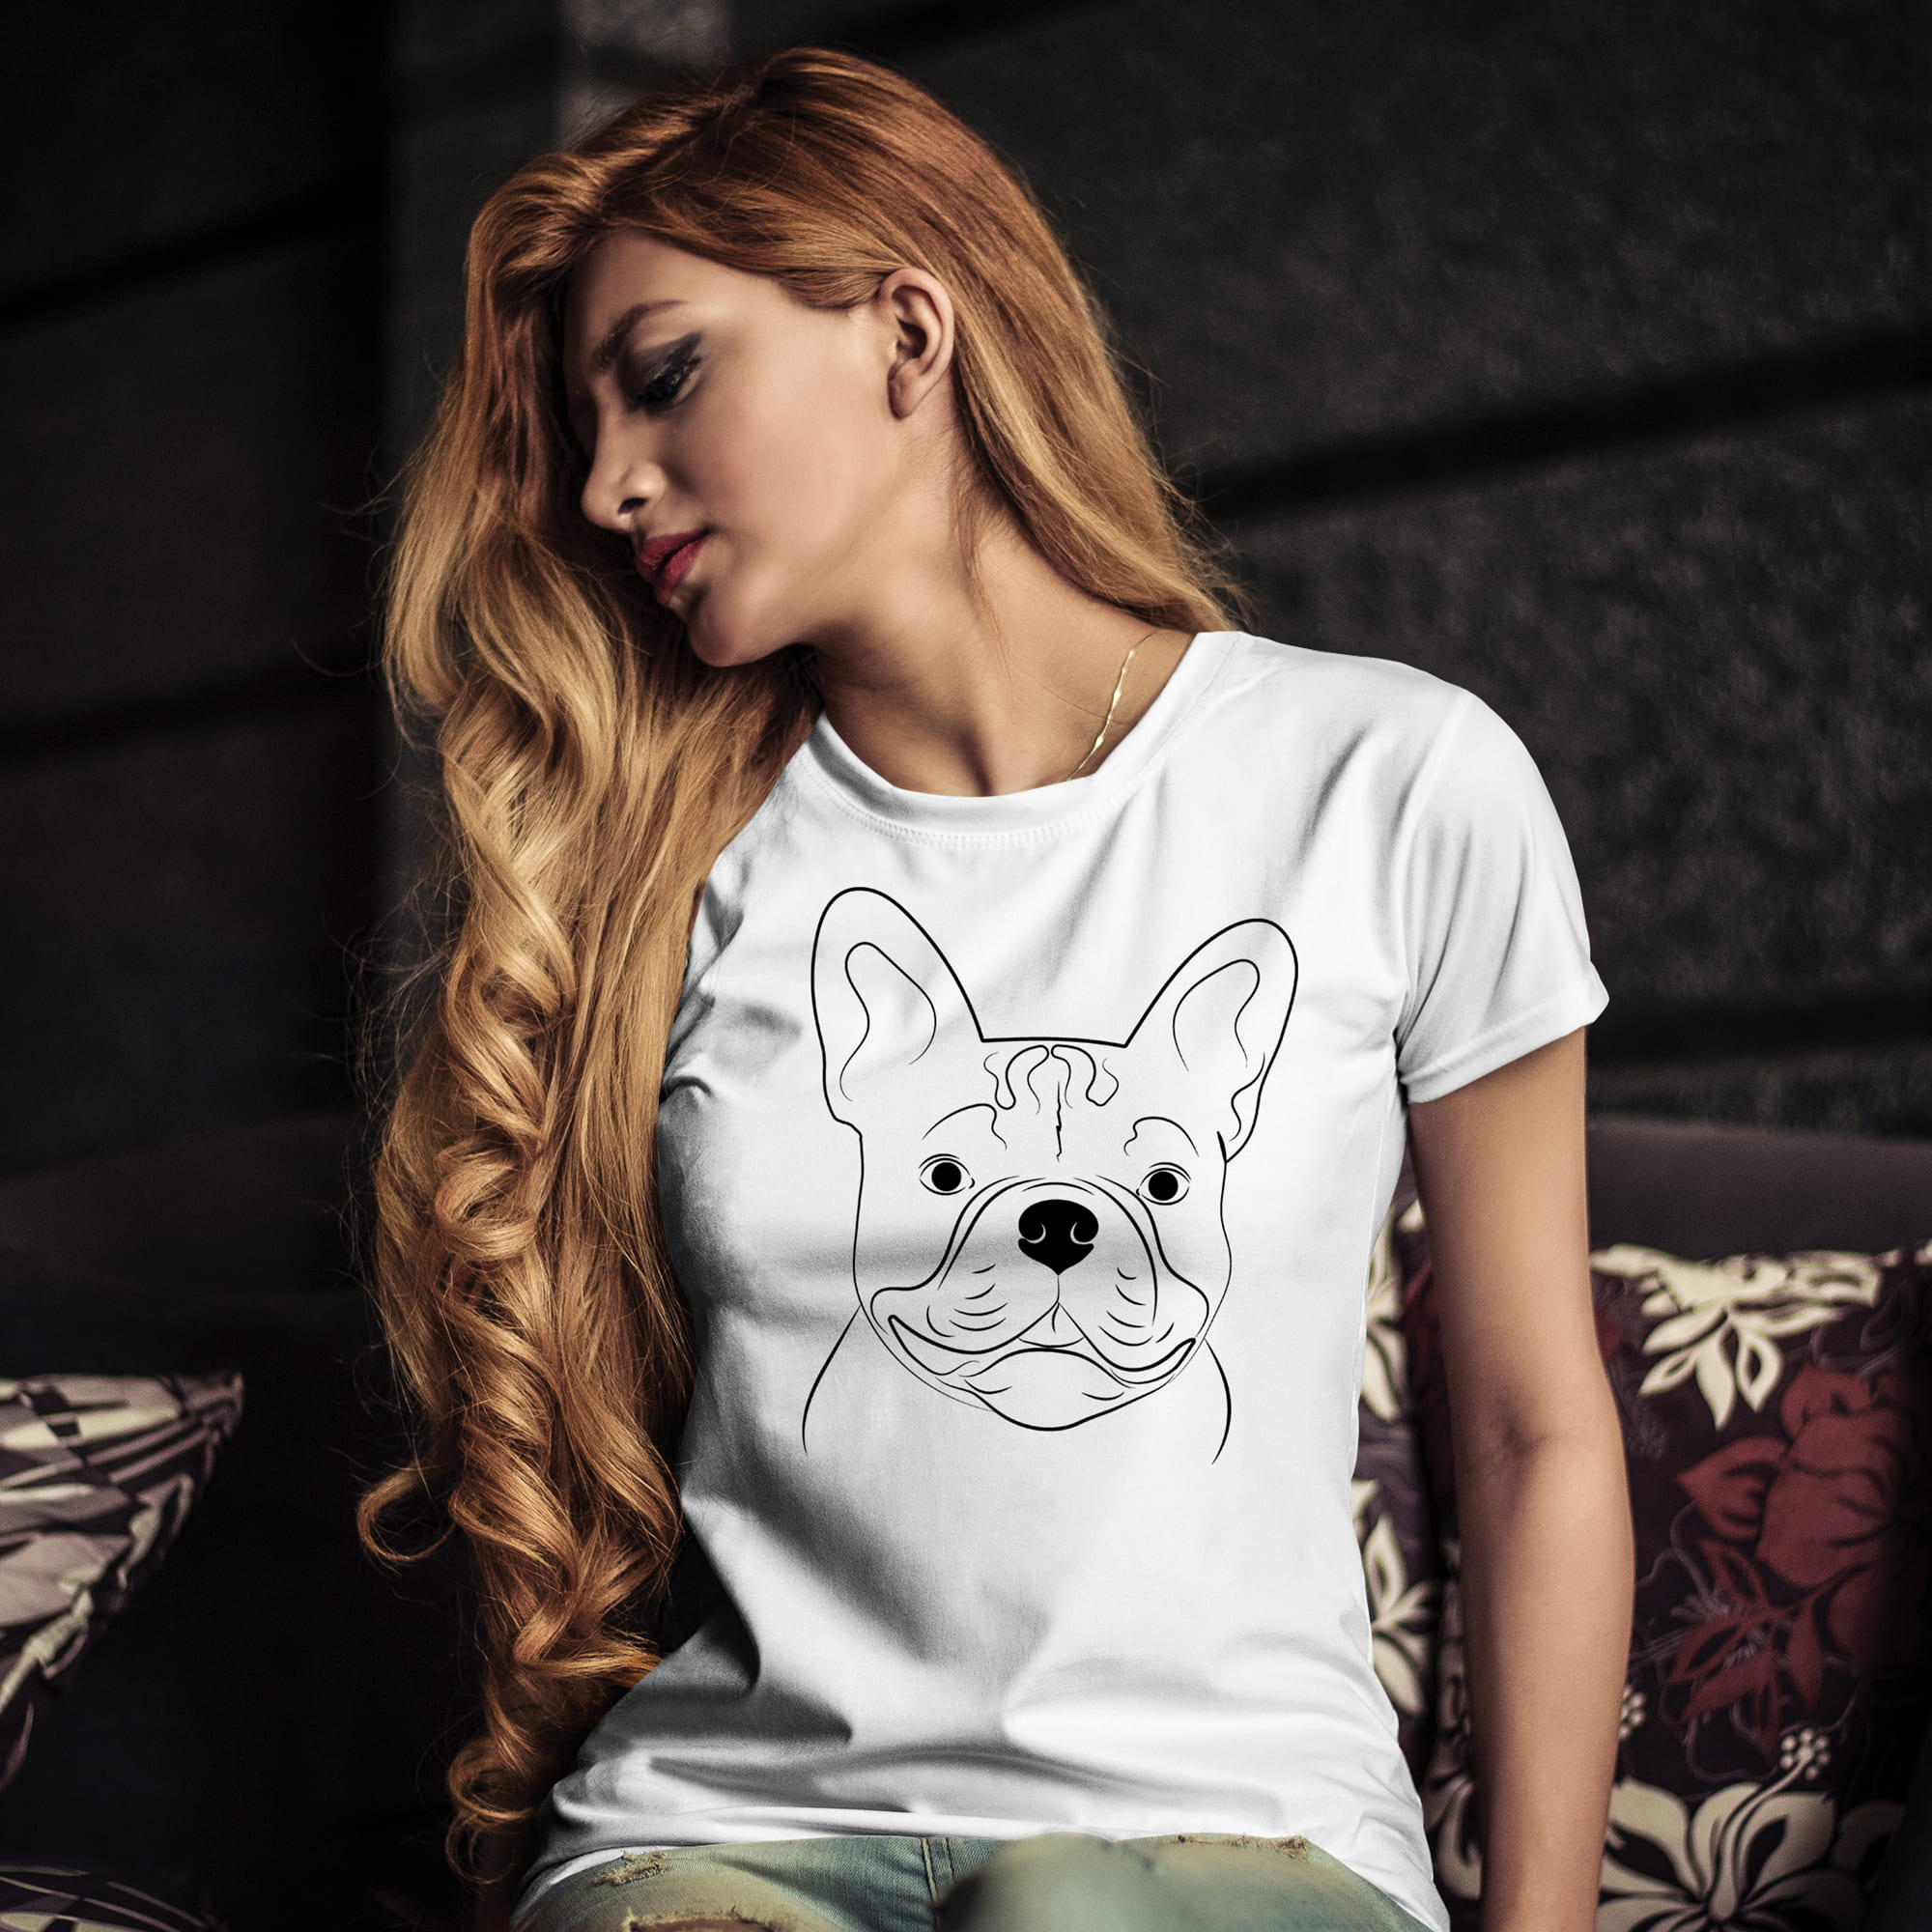 Woman sitting on a couch wearing a t - shirt with a dog on it.